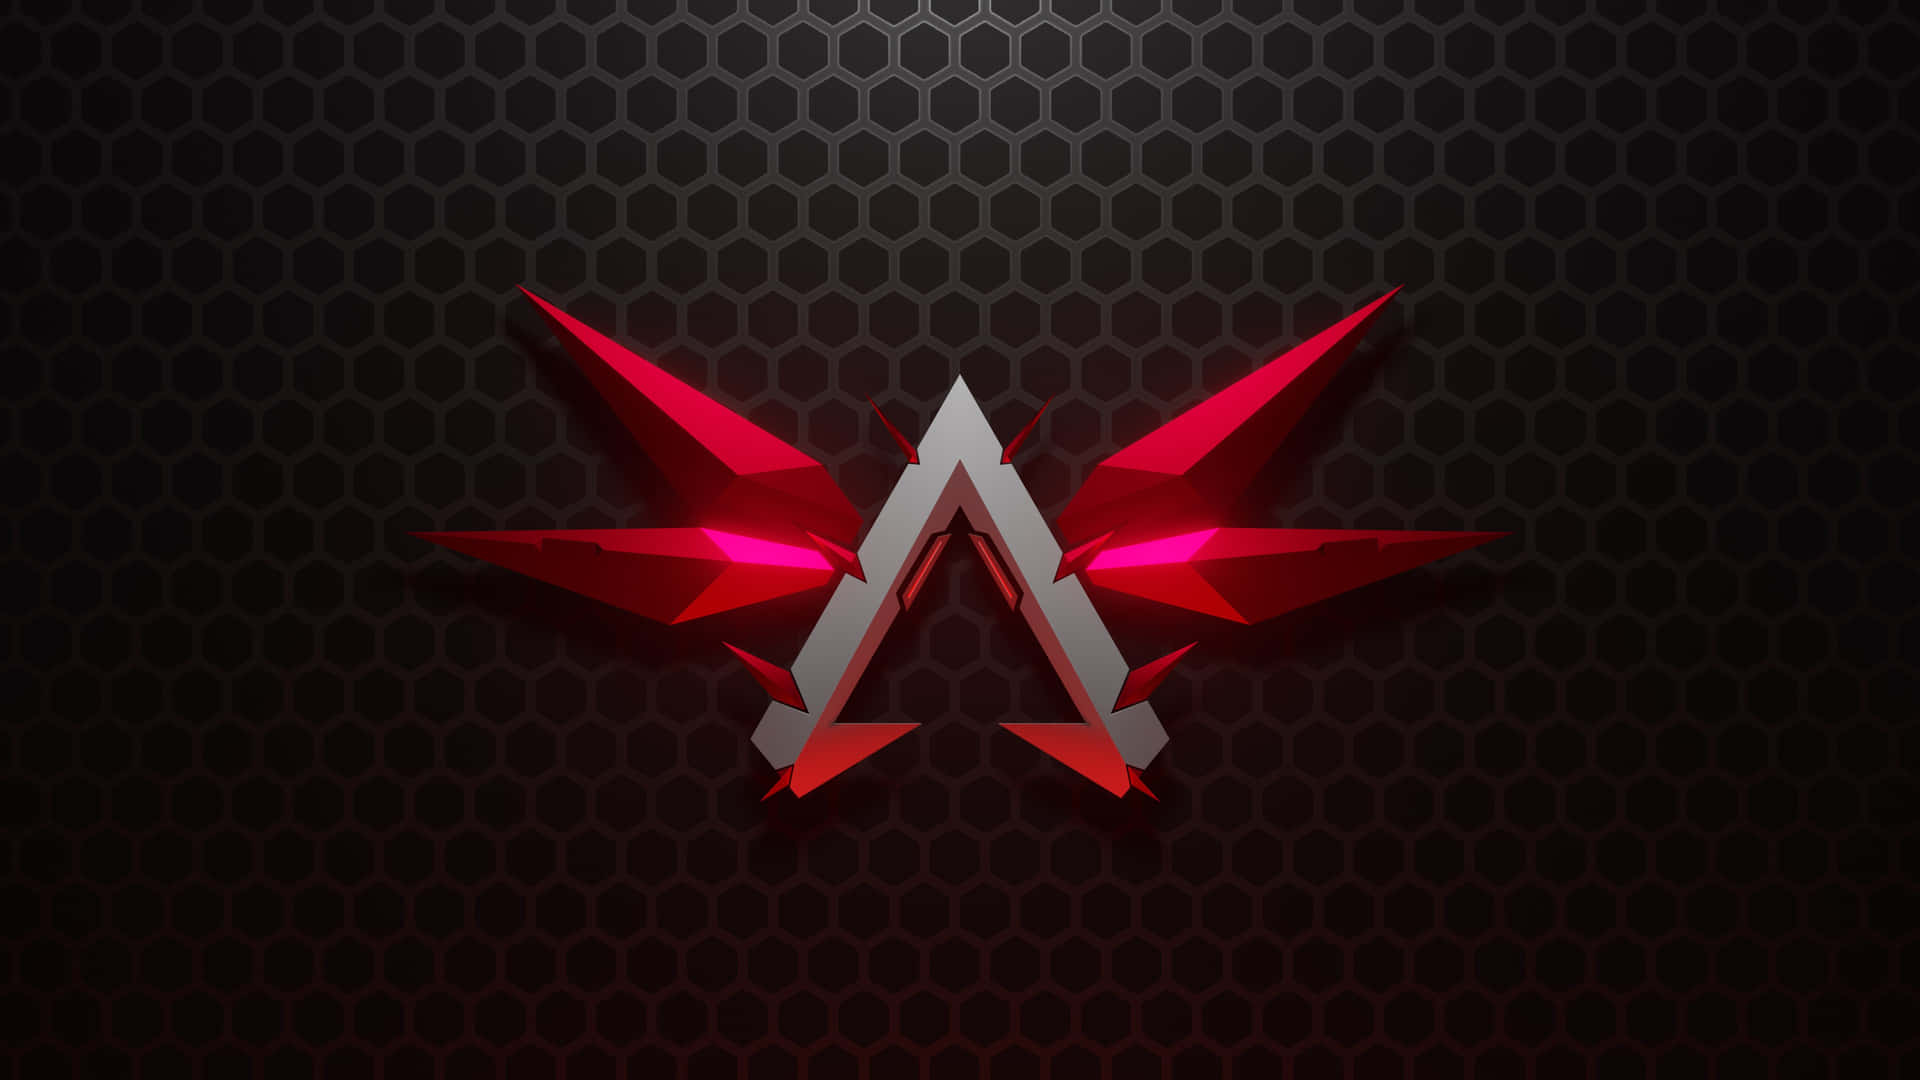 Silver Metal Apex Legends Logo With Wings Wallpaper